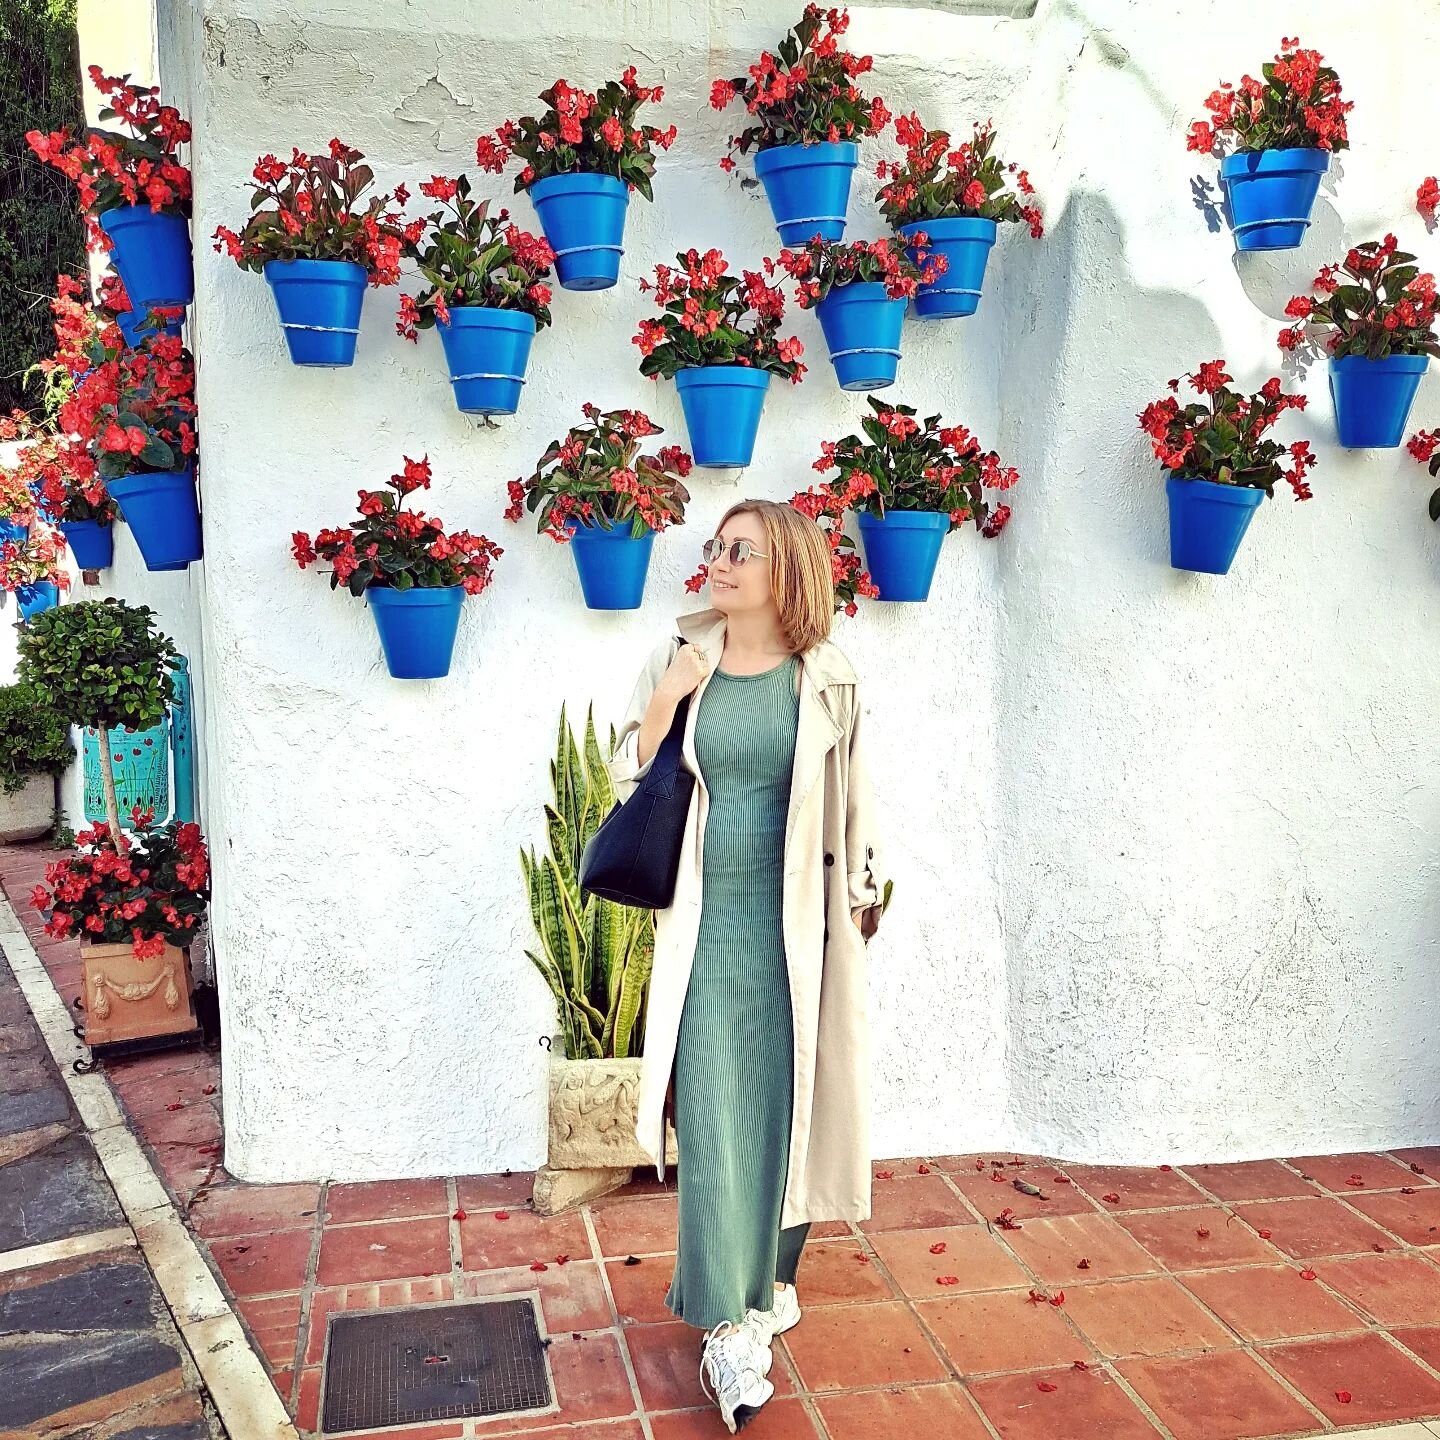 Emily in Marbella 🌺

I always love to wander the streets of old town Marbella. Give me a whitewashed wall covered in colourful plant pots any day! 

For me old town Marbella is the best part of the city. I love to get lost in the network of narrow f